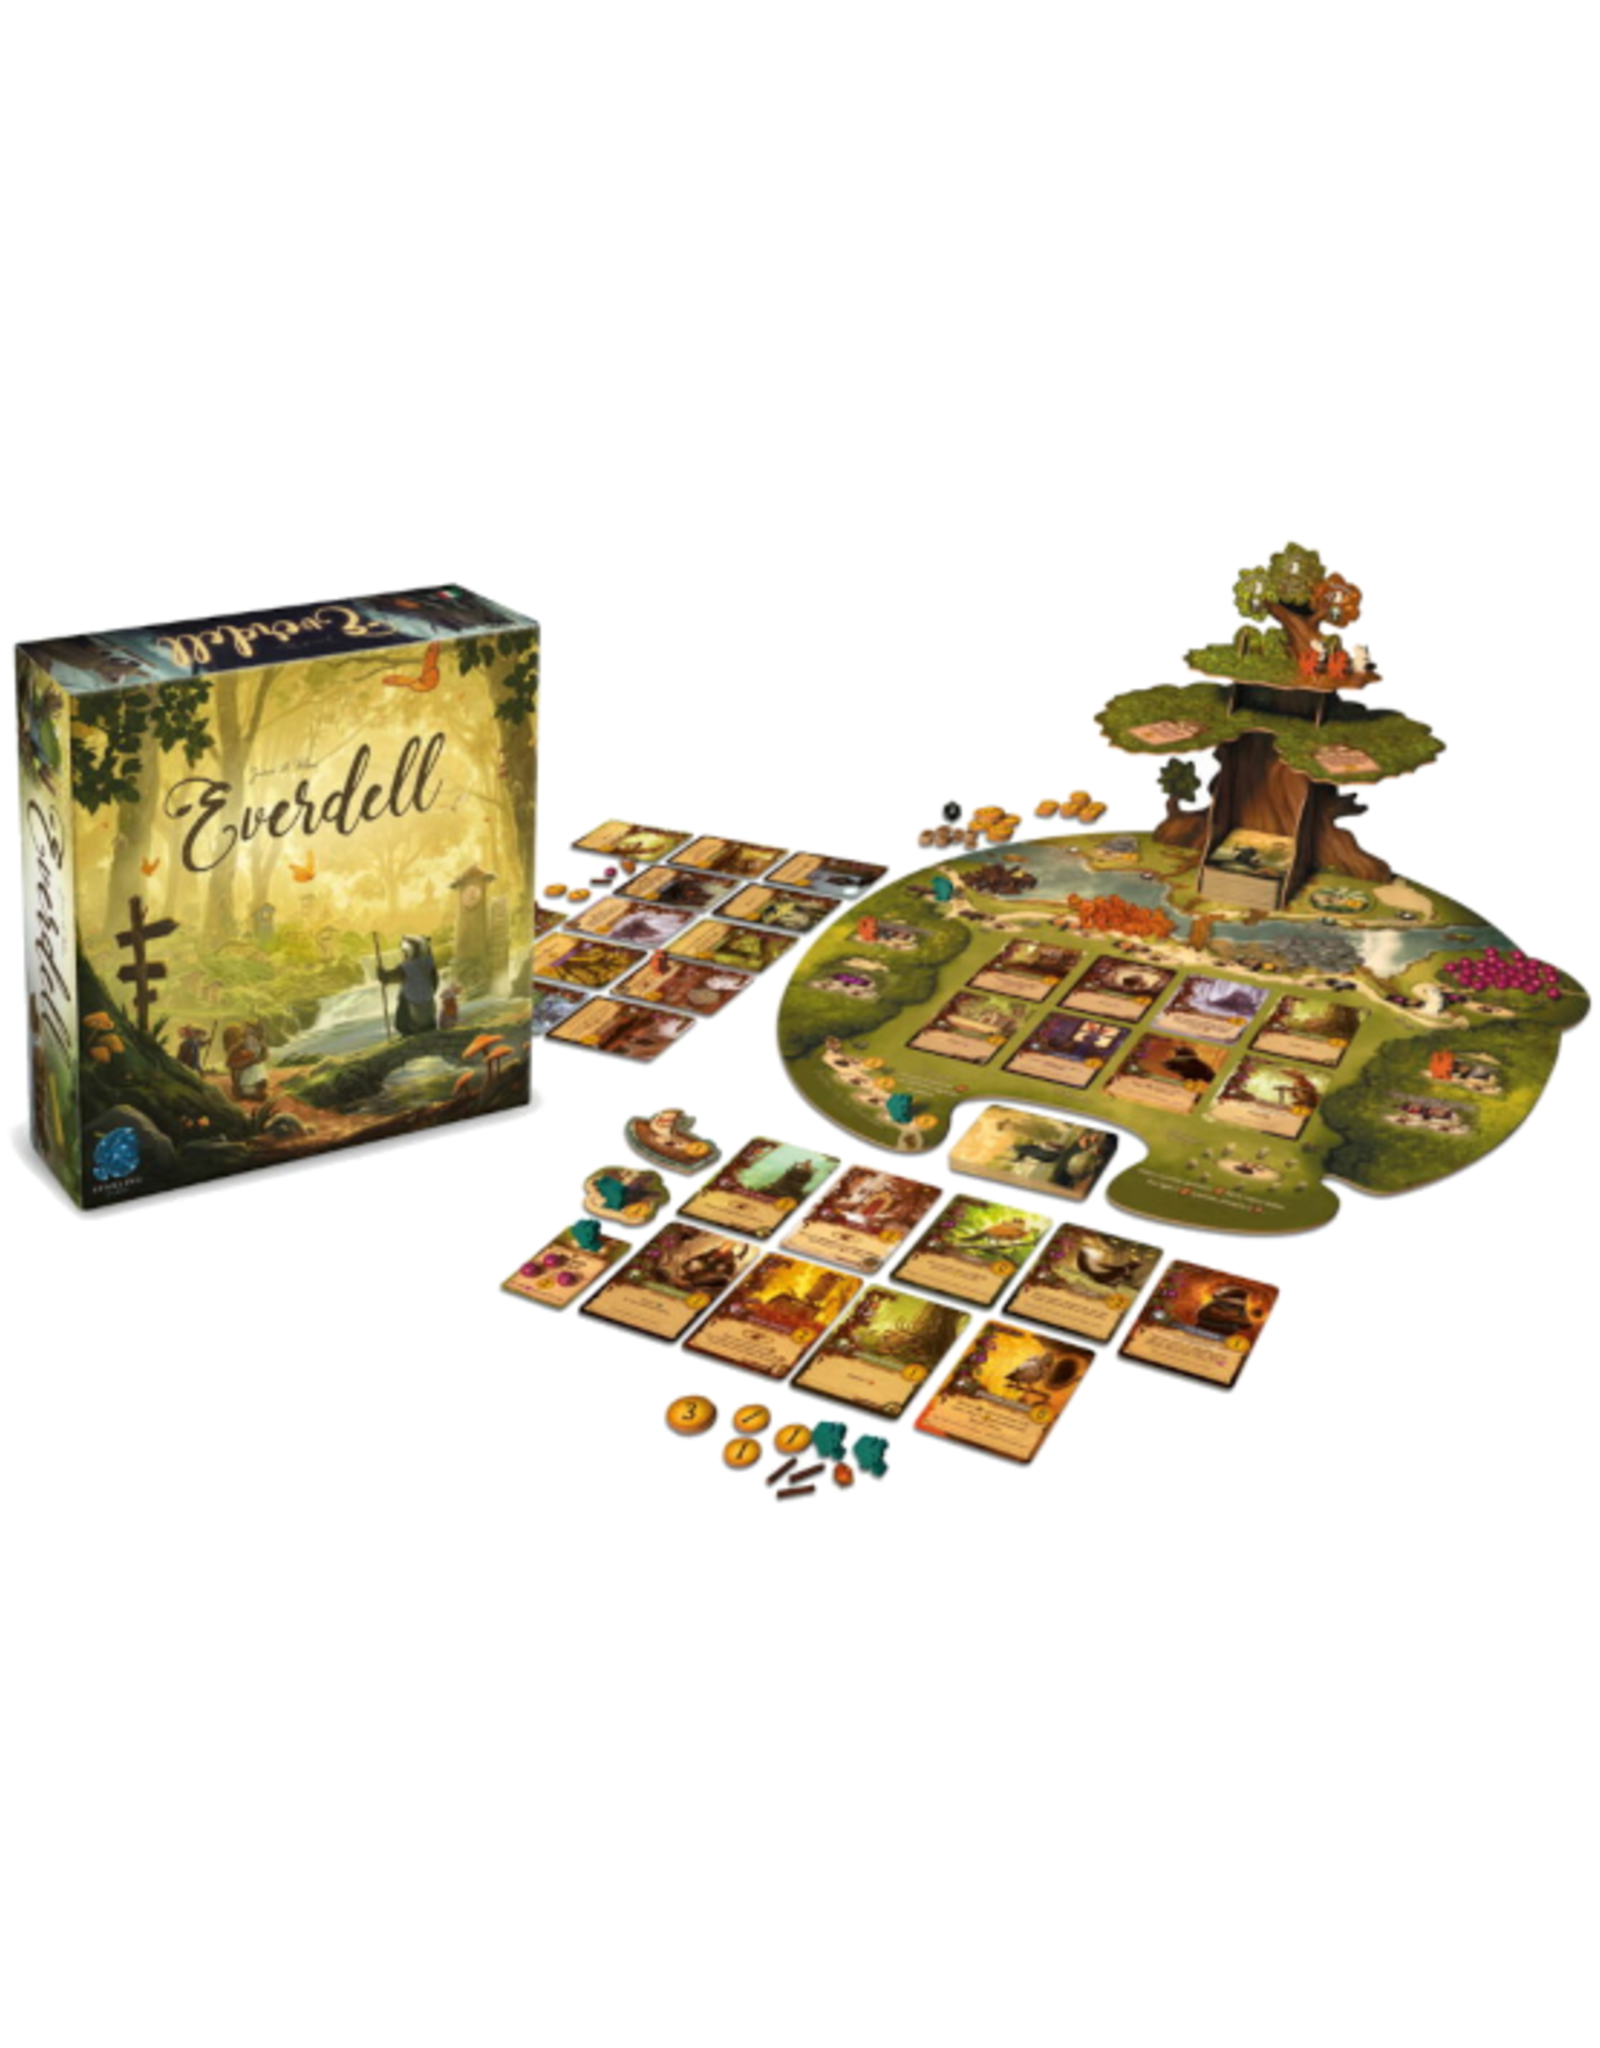 Starling Games - Everdell